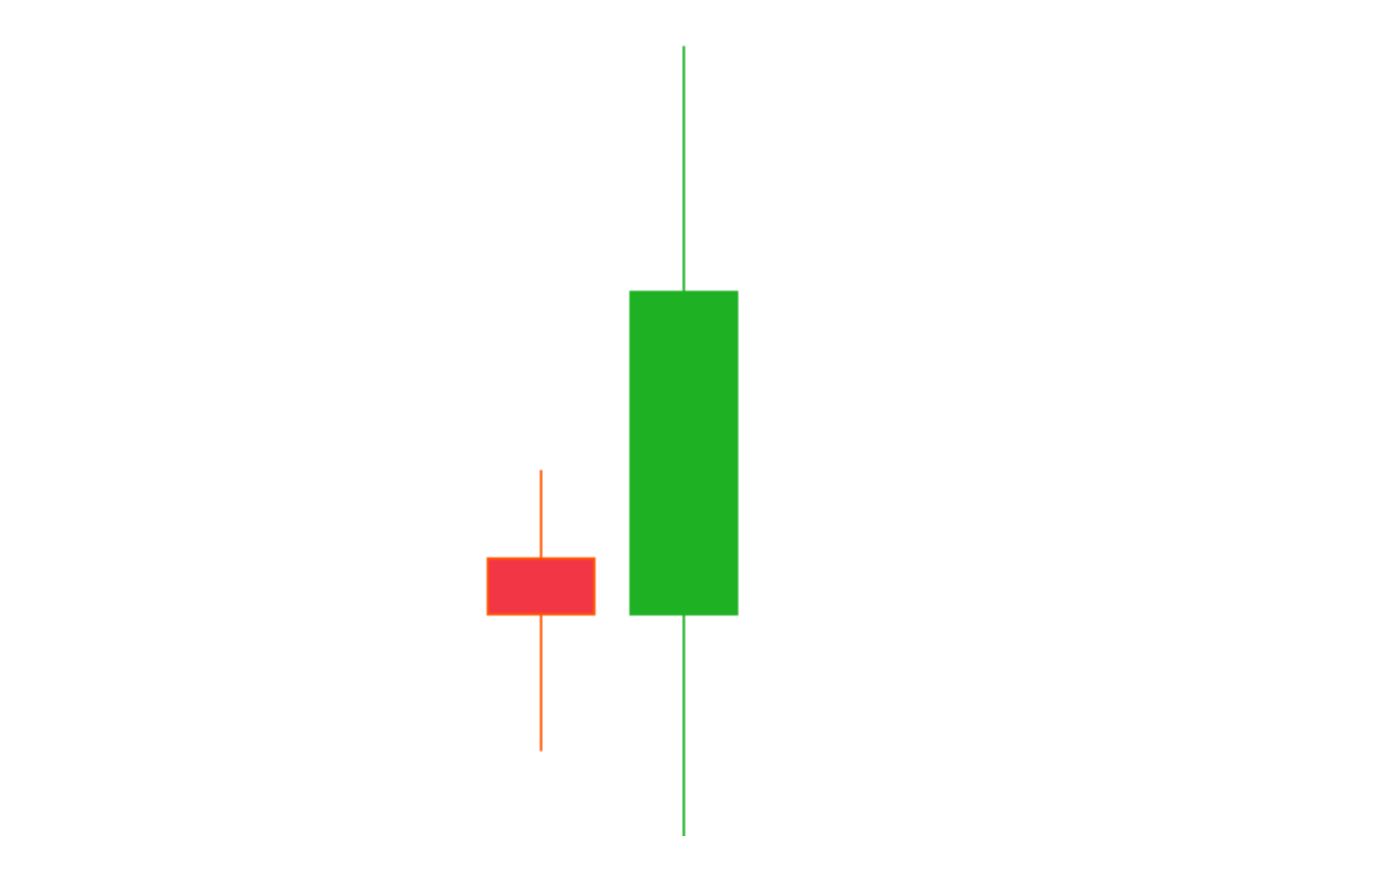 An image of the bullish engulfing pattern, which has a small red candle on the left, and a large green candle on the right.